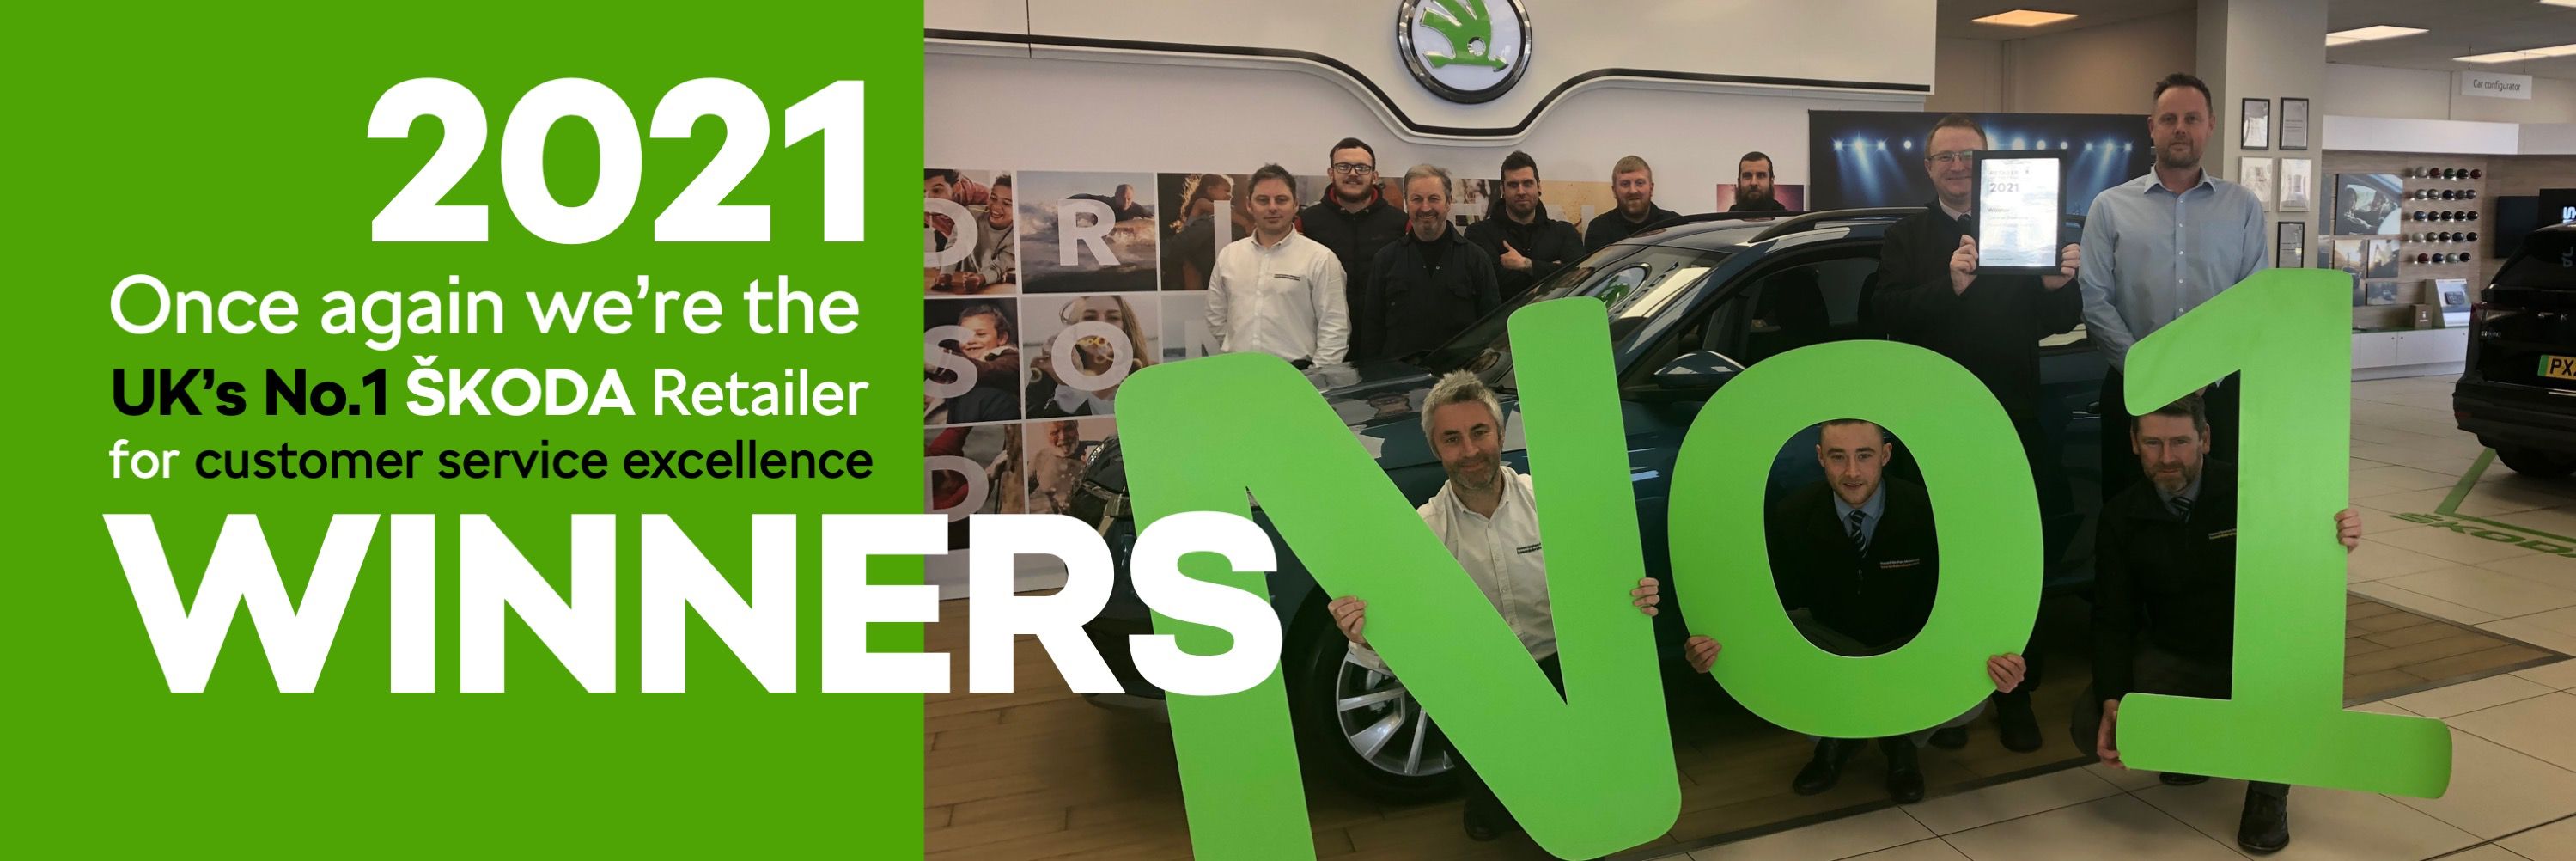 No.1 SKODA Retailer in UK for looking after our customers